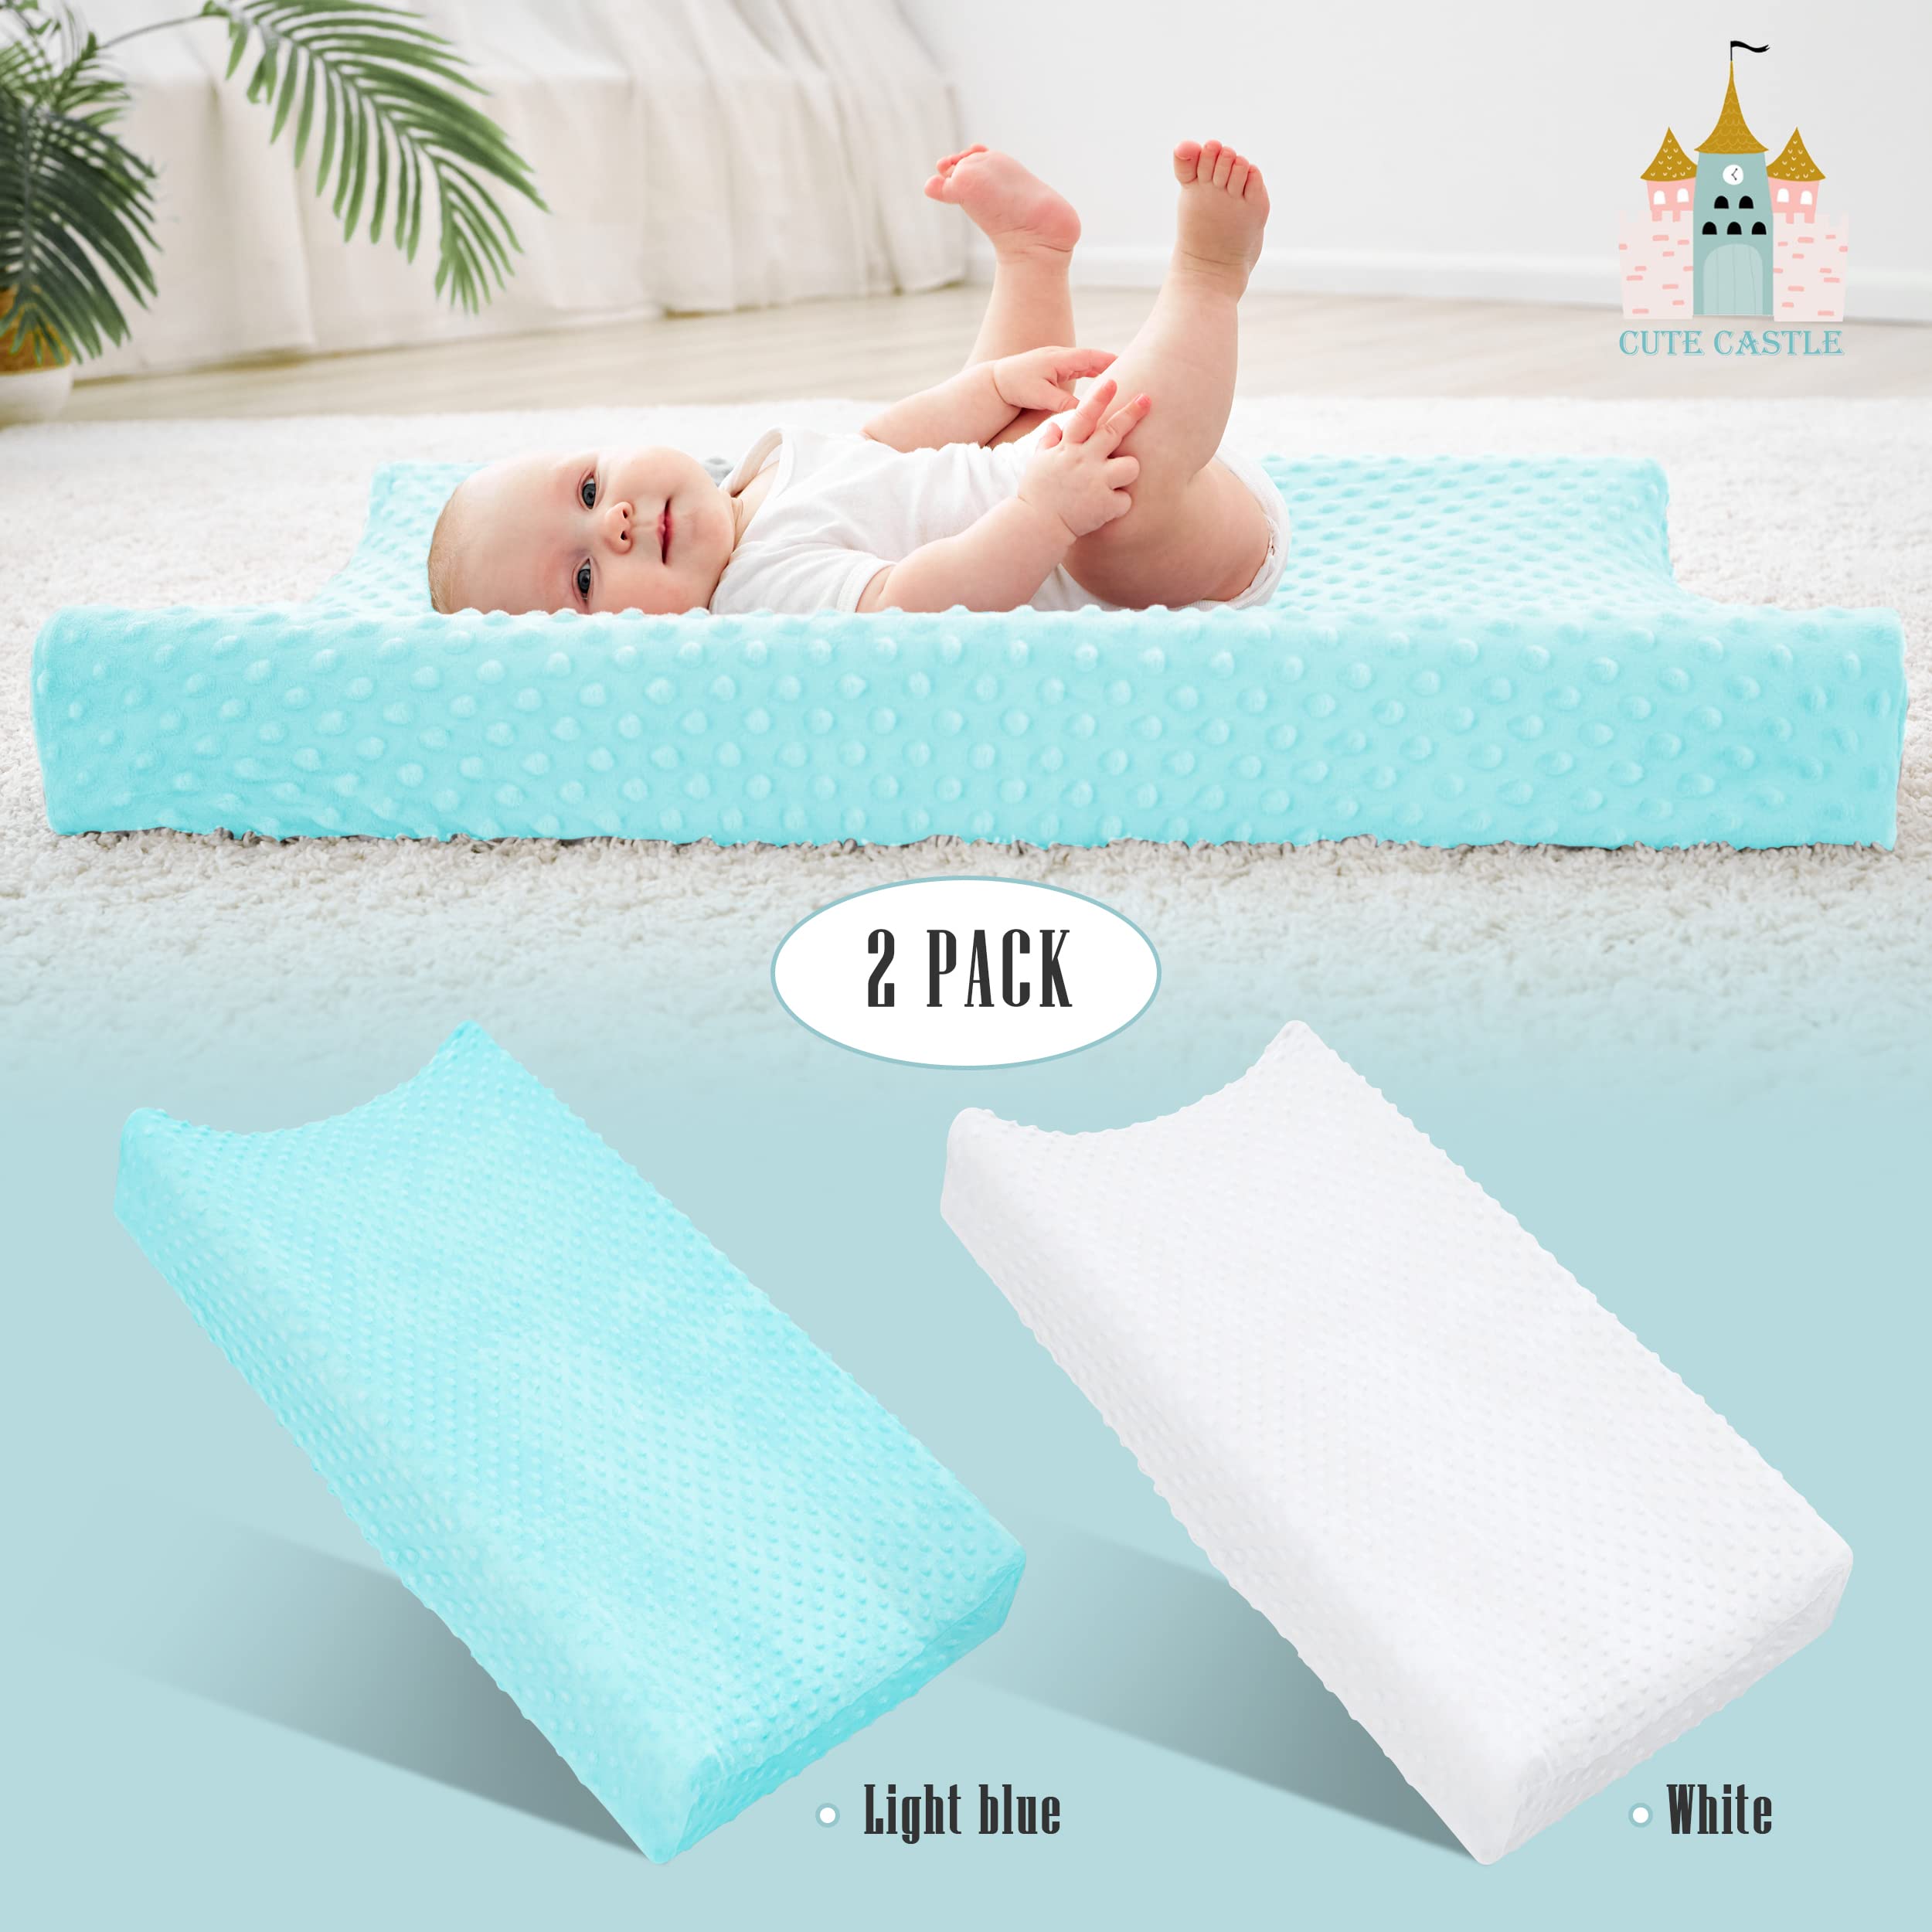 Cute Castle Changing Pad Cover - Ultra Soft Bean Dot Plush Changing Table Covers Breathable Baby Changing Pad Table Sheets for Boy and Girl (2 Pack White and Aquamarine)